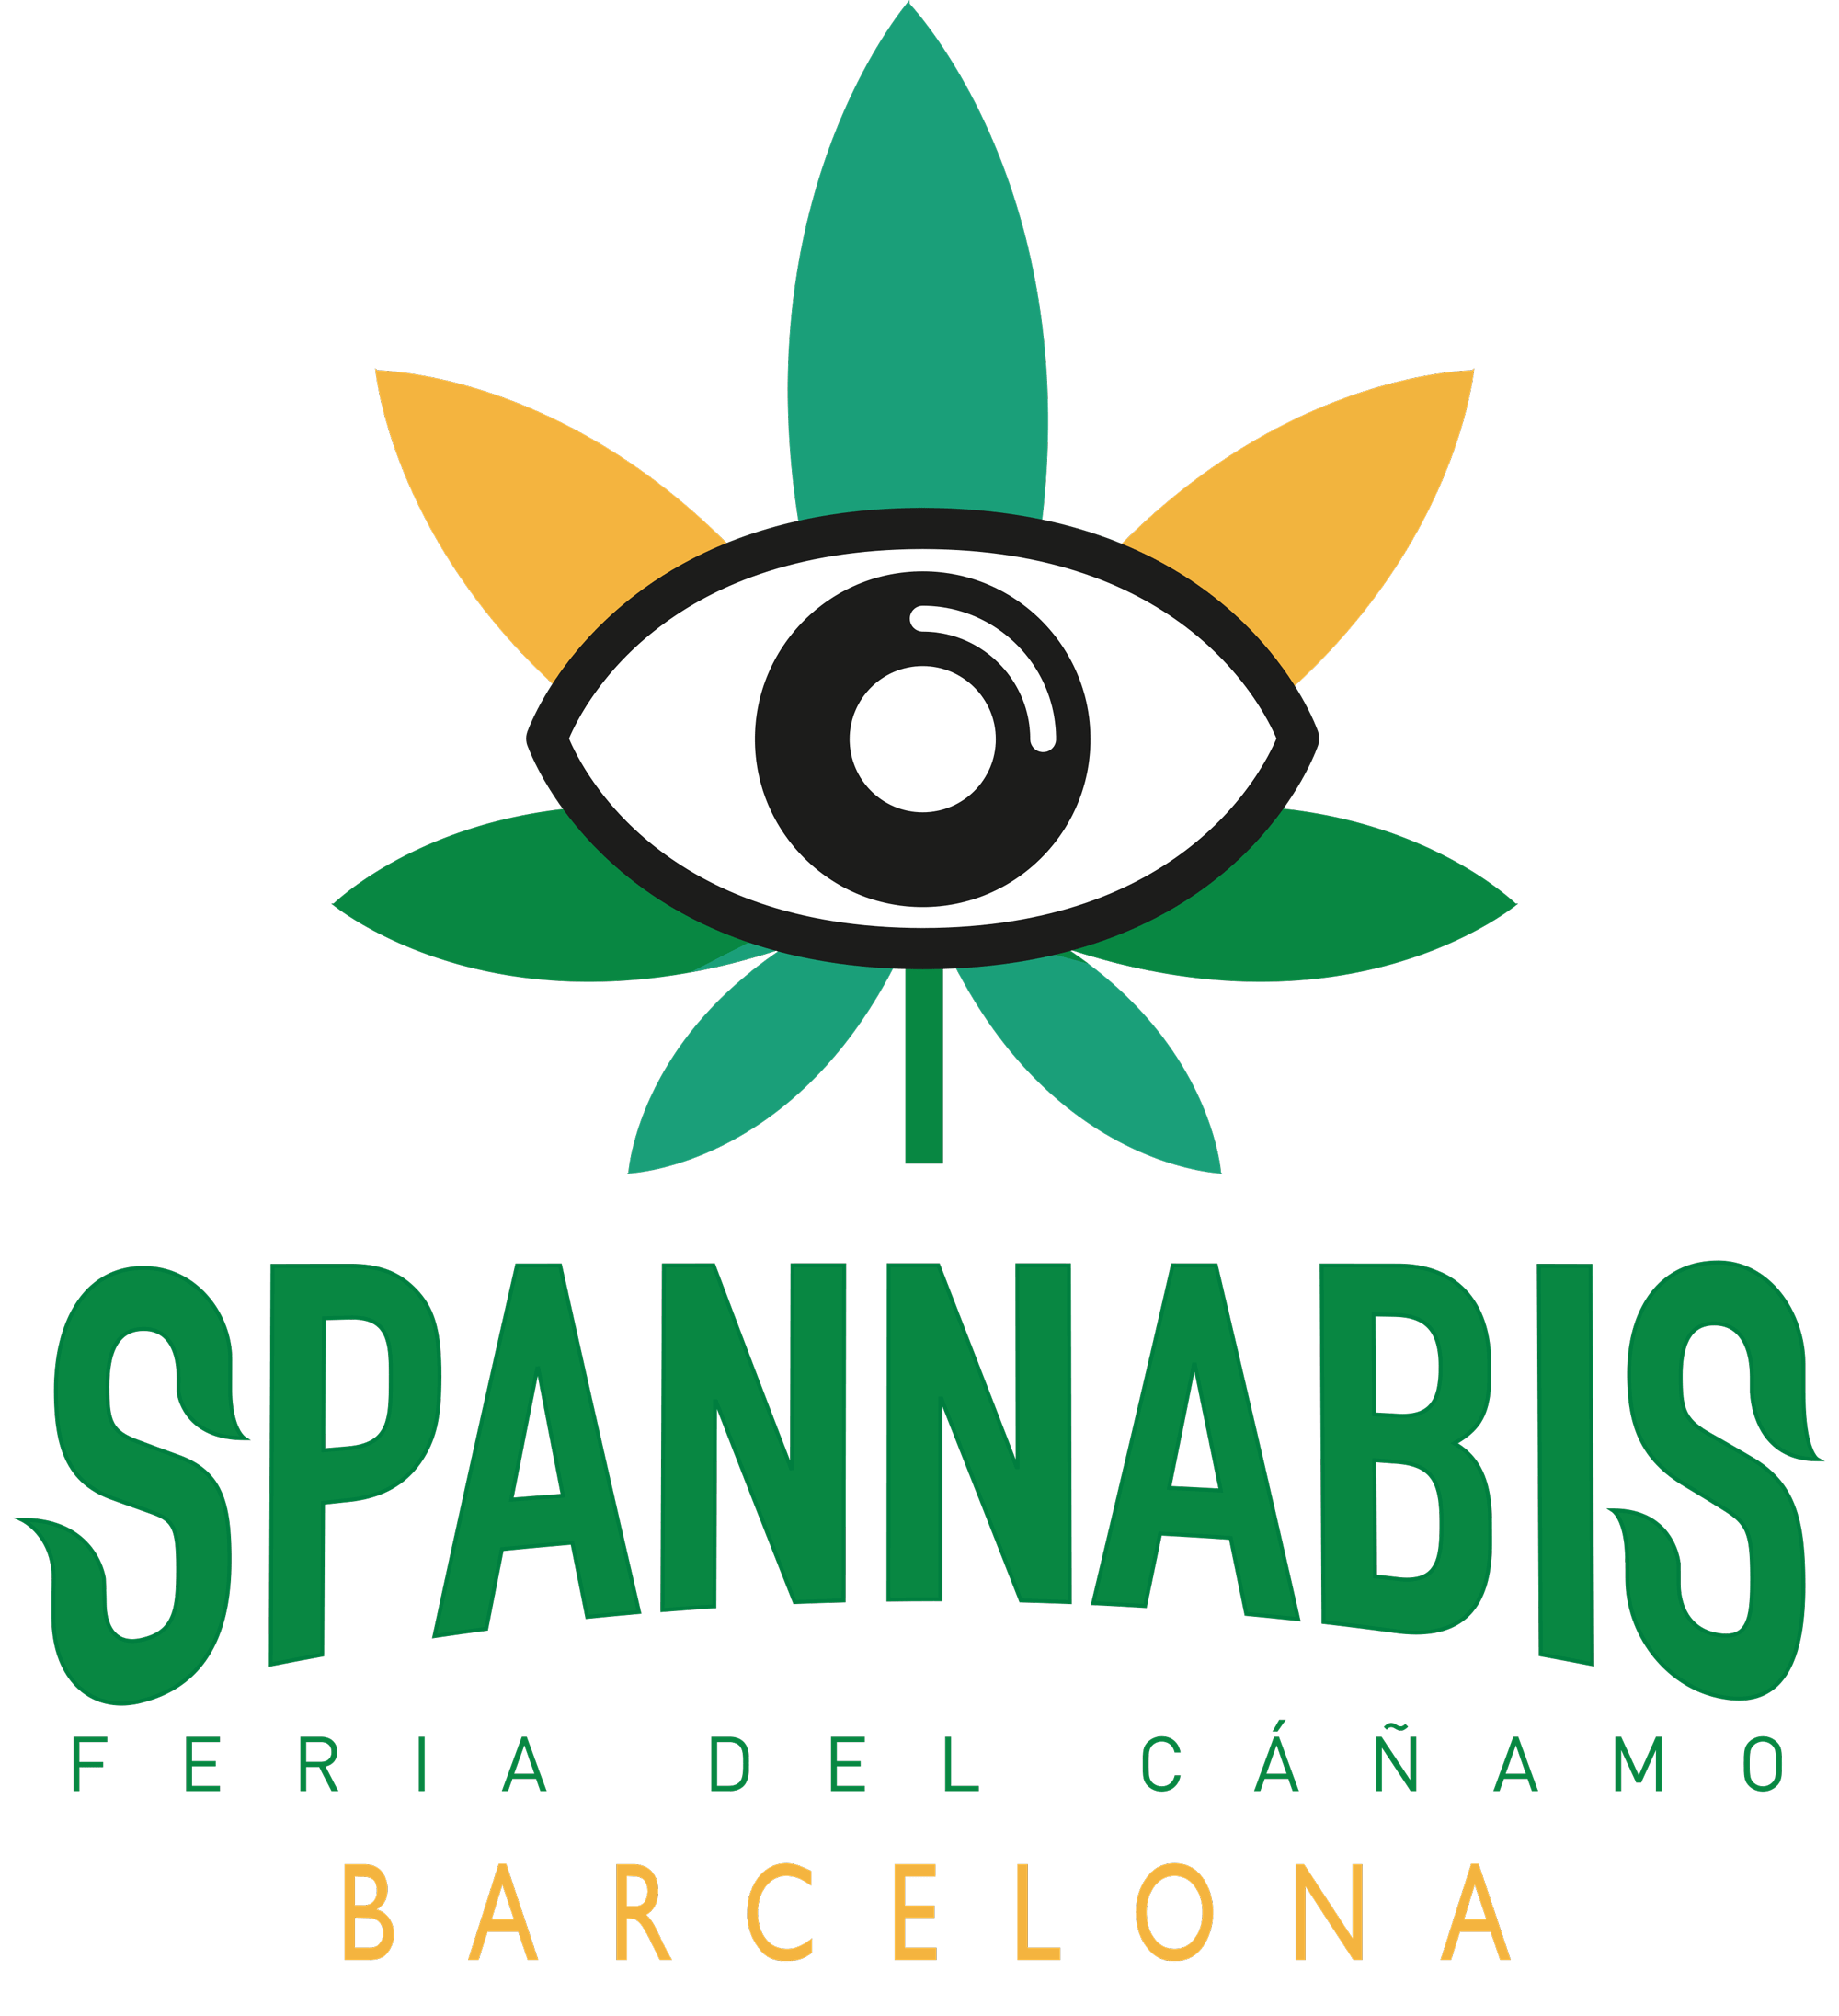 Spannabis and CannabisHub Cdays 2023: Everything you need to know